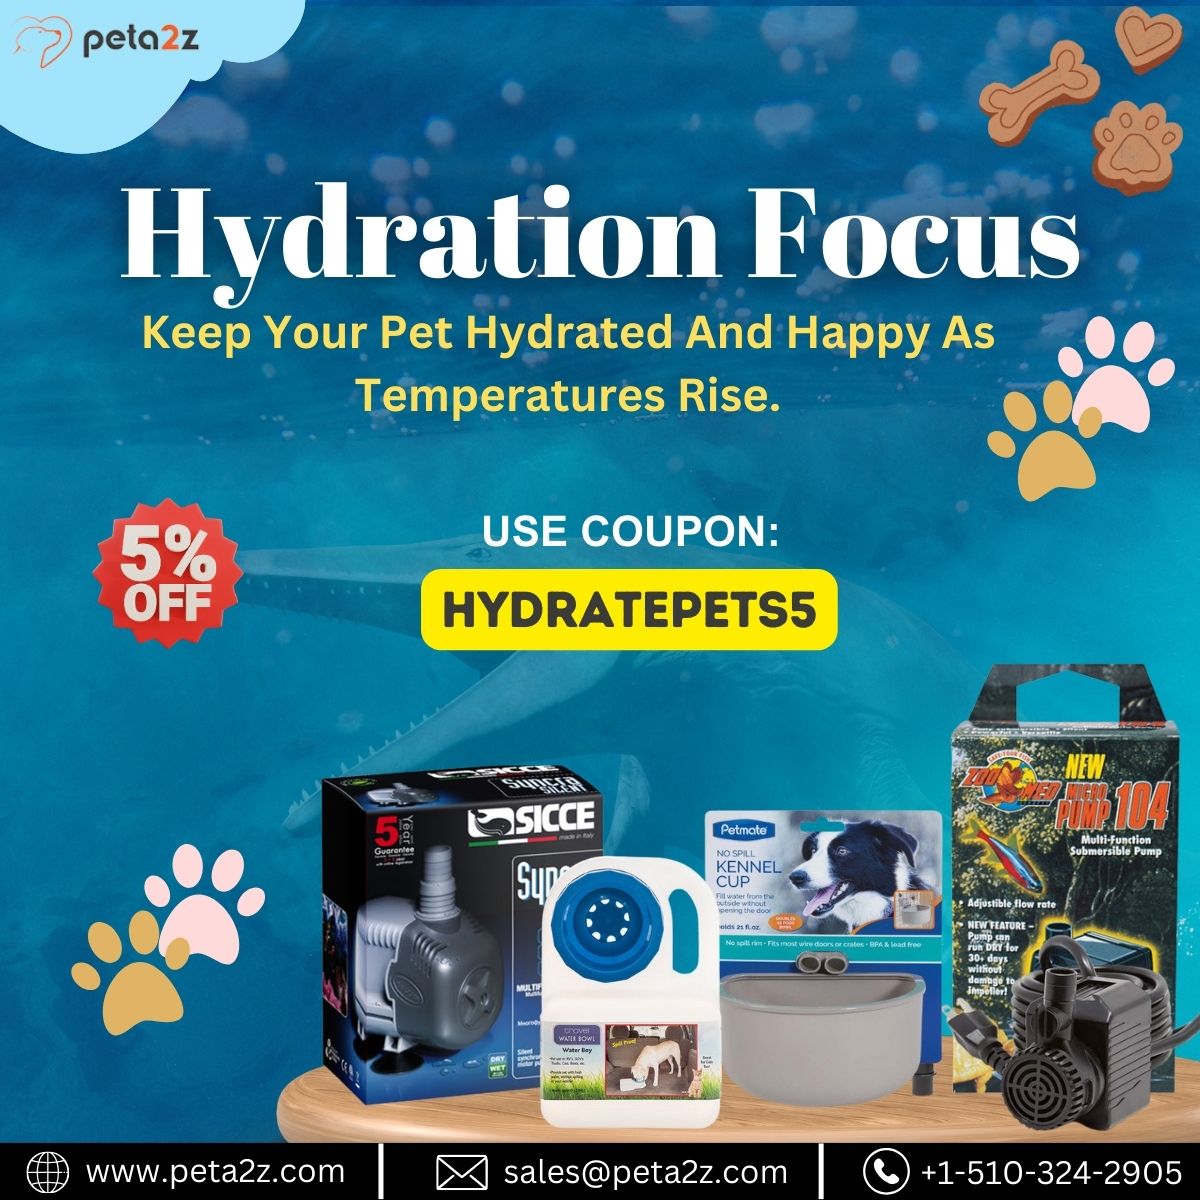 🐾☀️ As the mercury climbs, it's crucial to keep our furry friends cool and content! Remember to keep those water bowls topped up and provide plenty of shady spots for your pets to chill out. 🌿💧 #PetCare #SummerSafety #HydrationStation
bityl.co/OYv0